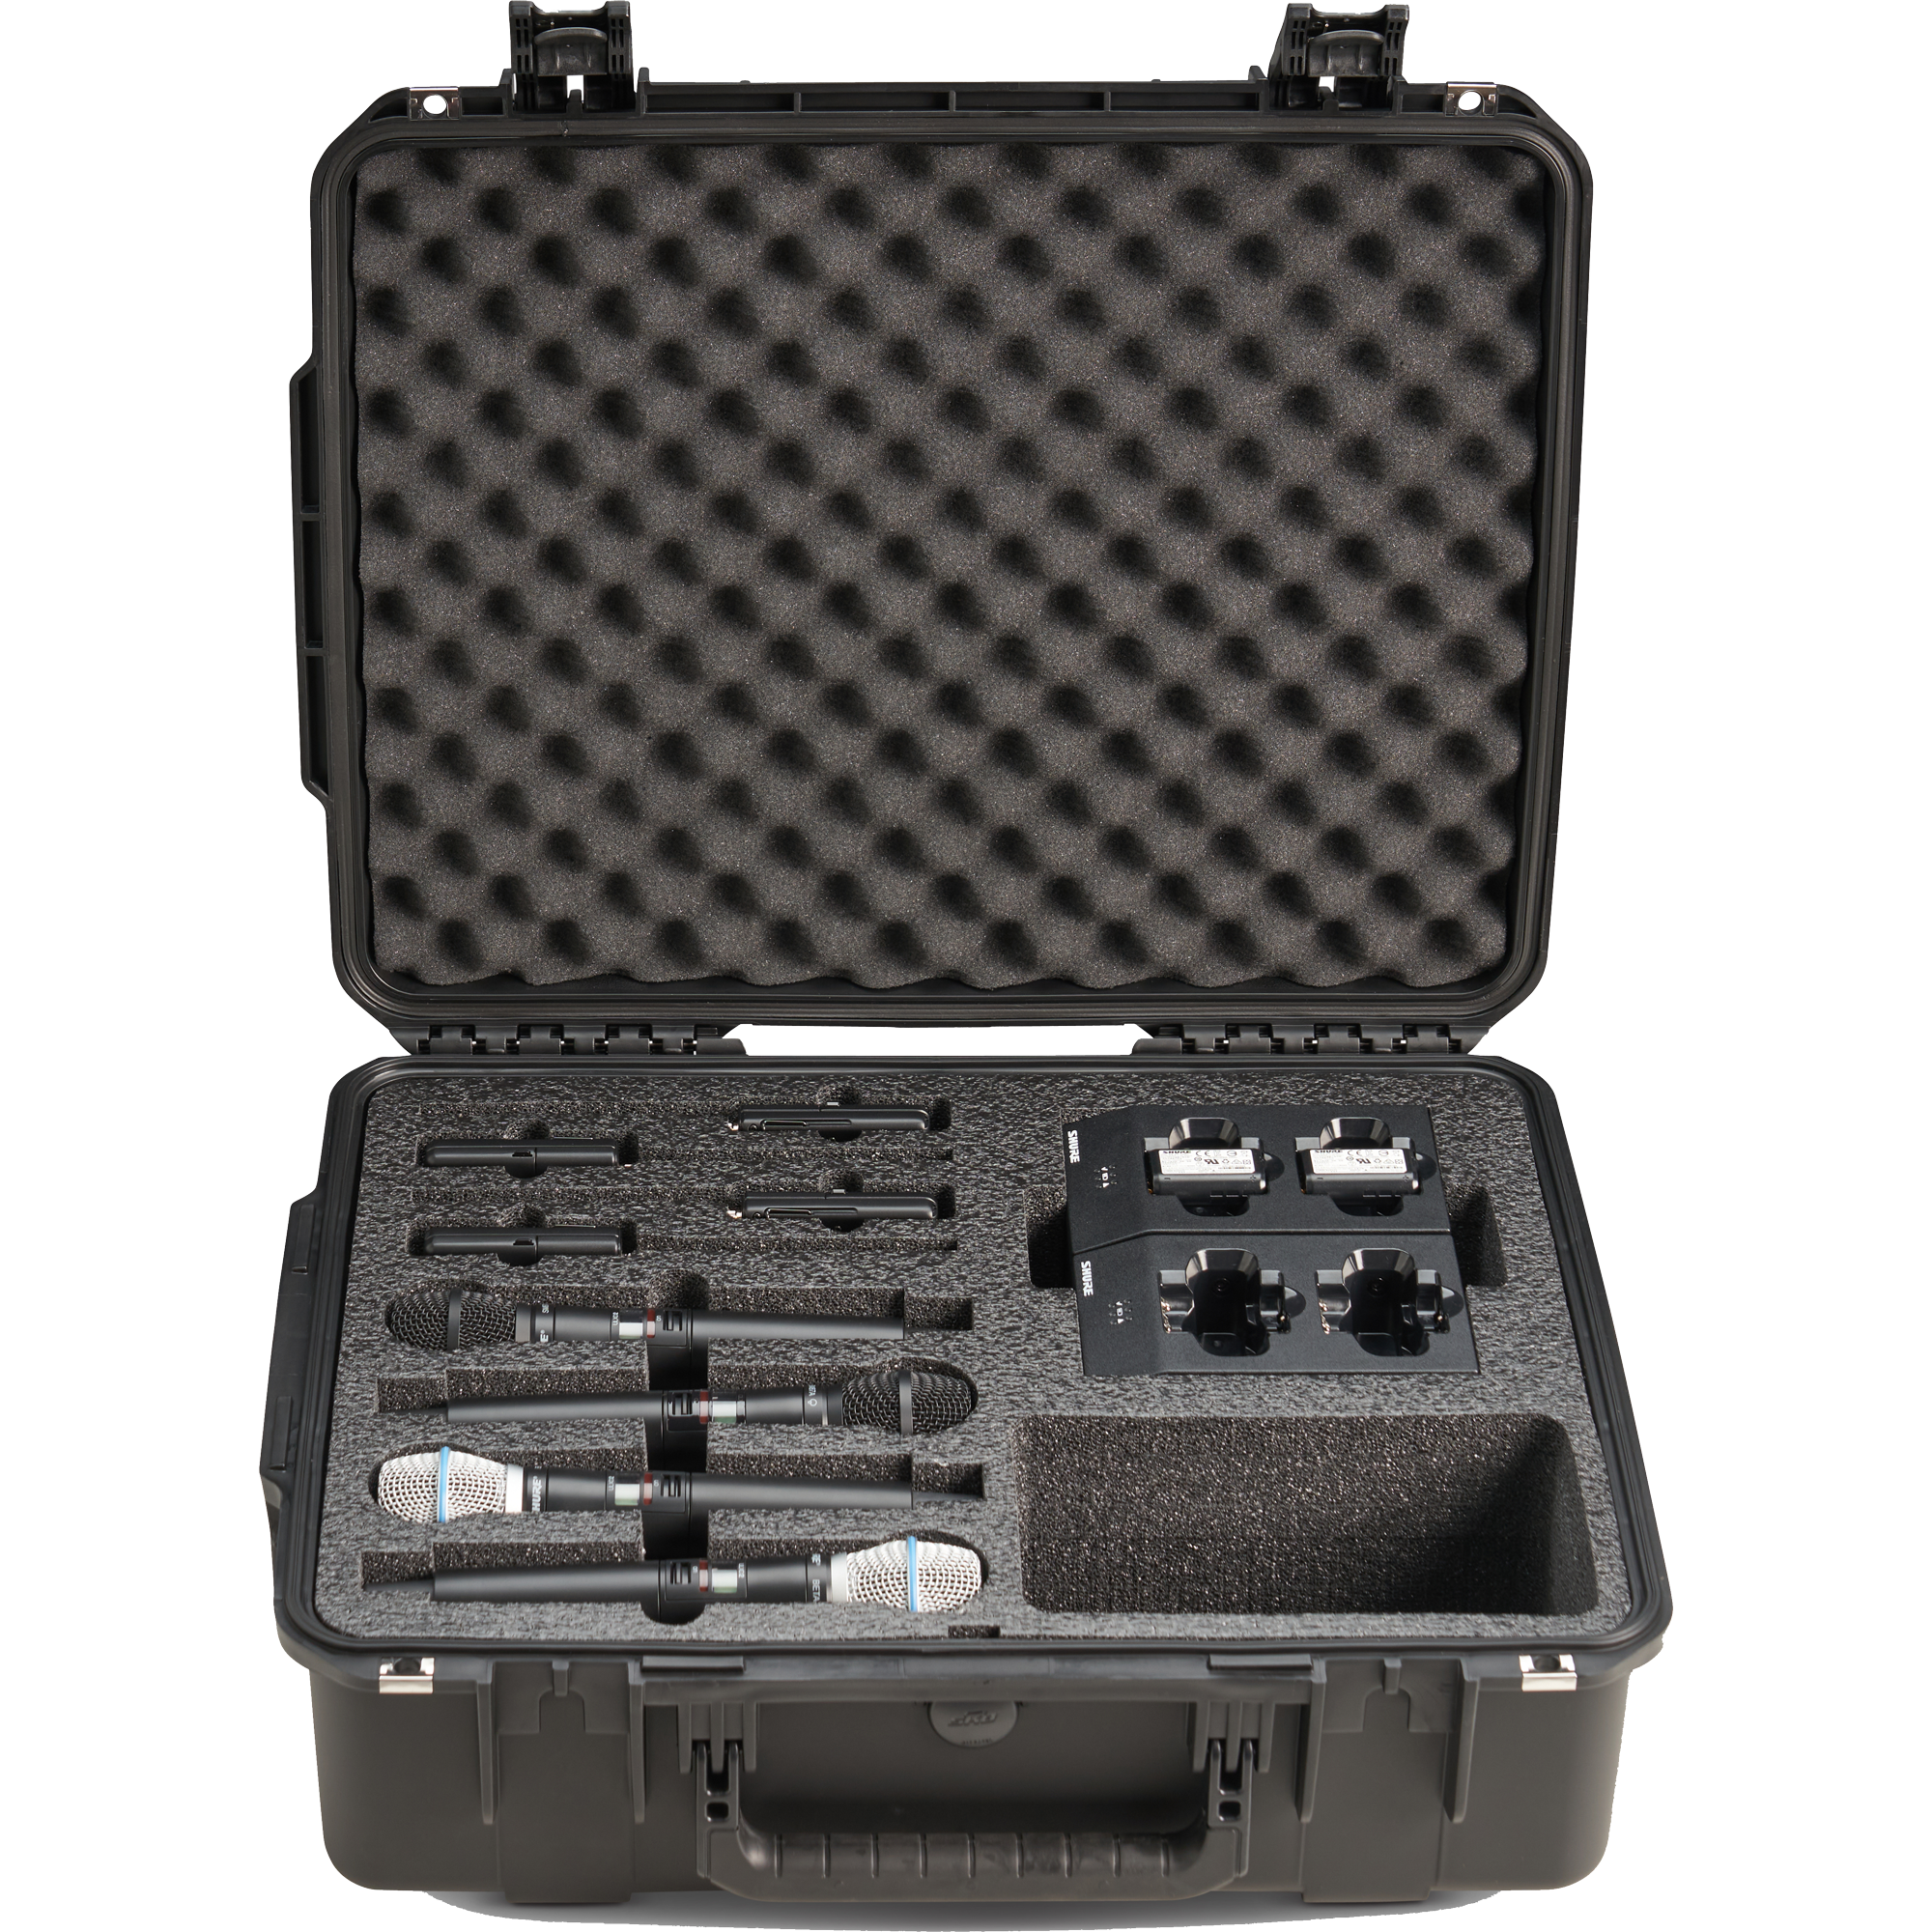 BYFP ipCase for 4x Shure Transmitters